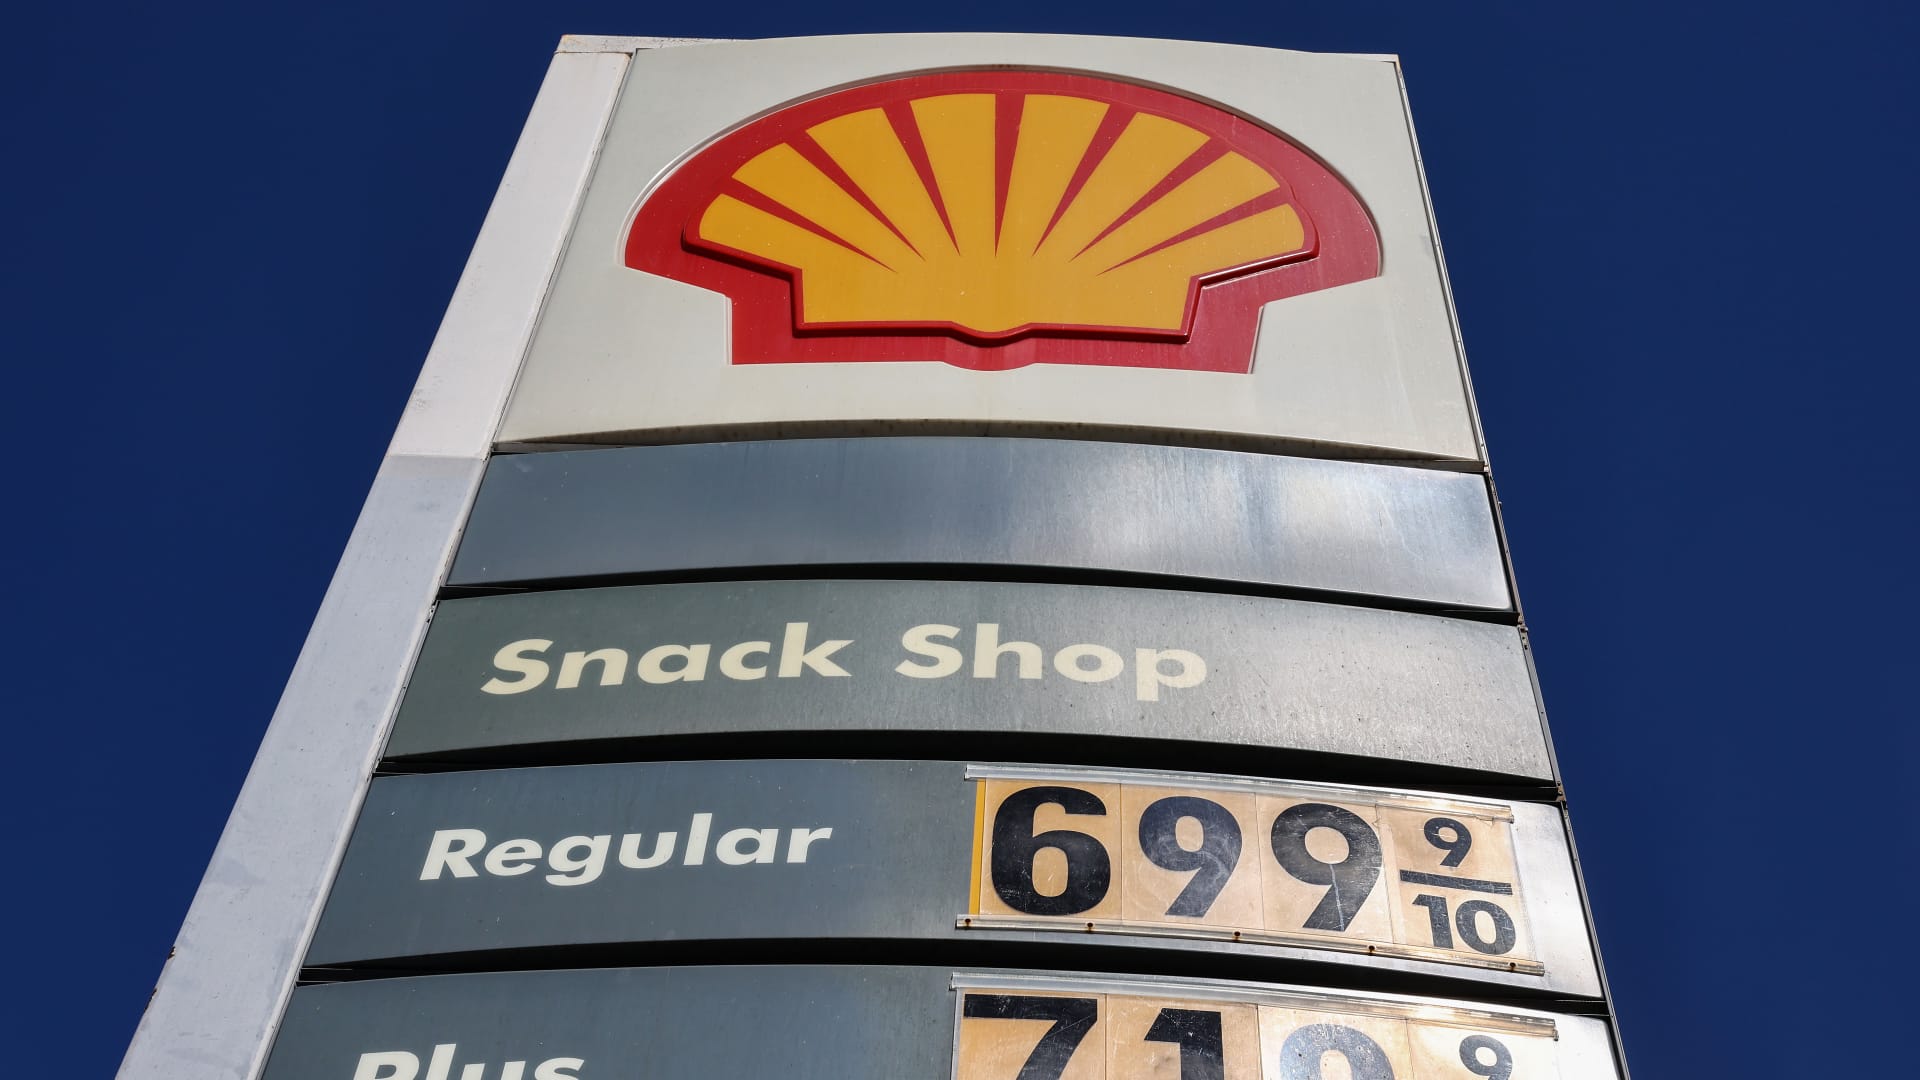 High gas prices are displayed at a Shell station on March 7, 2022 in Los Angeles, California.